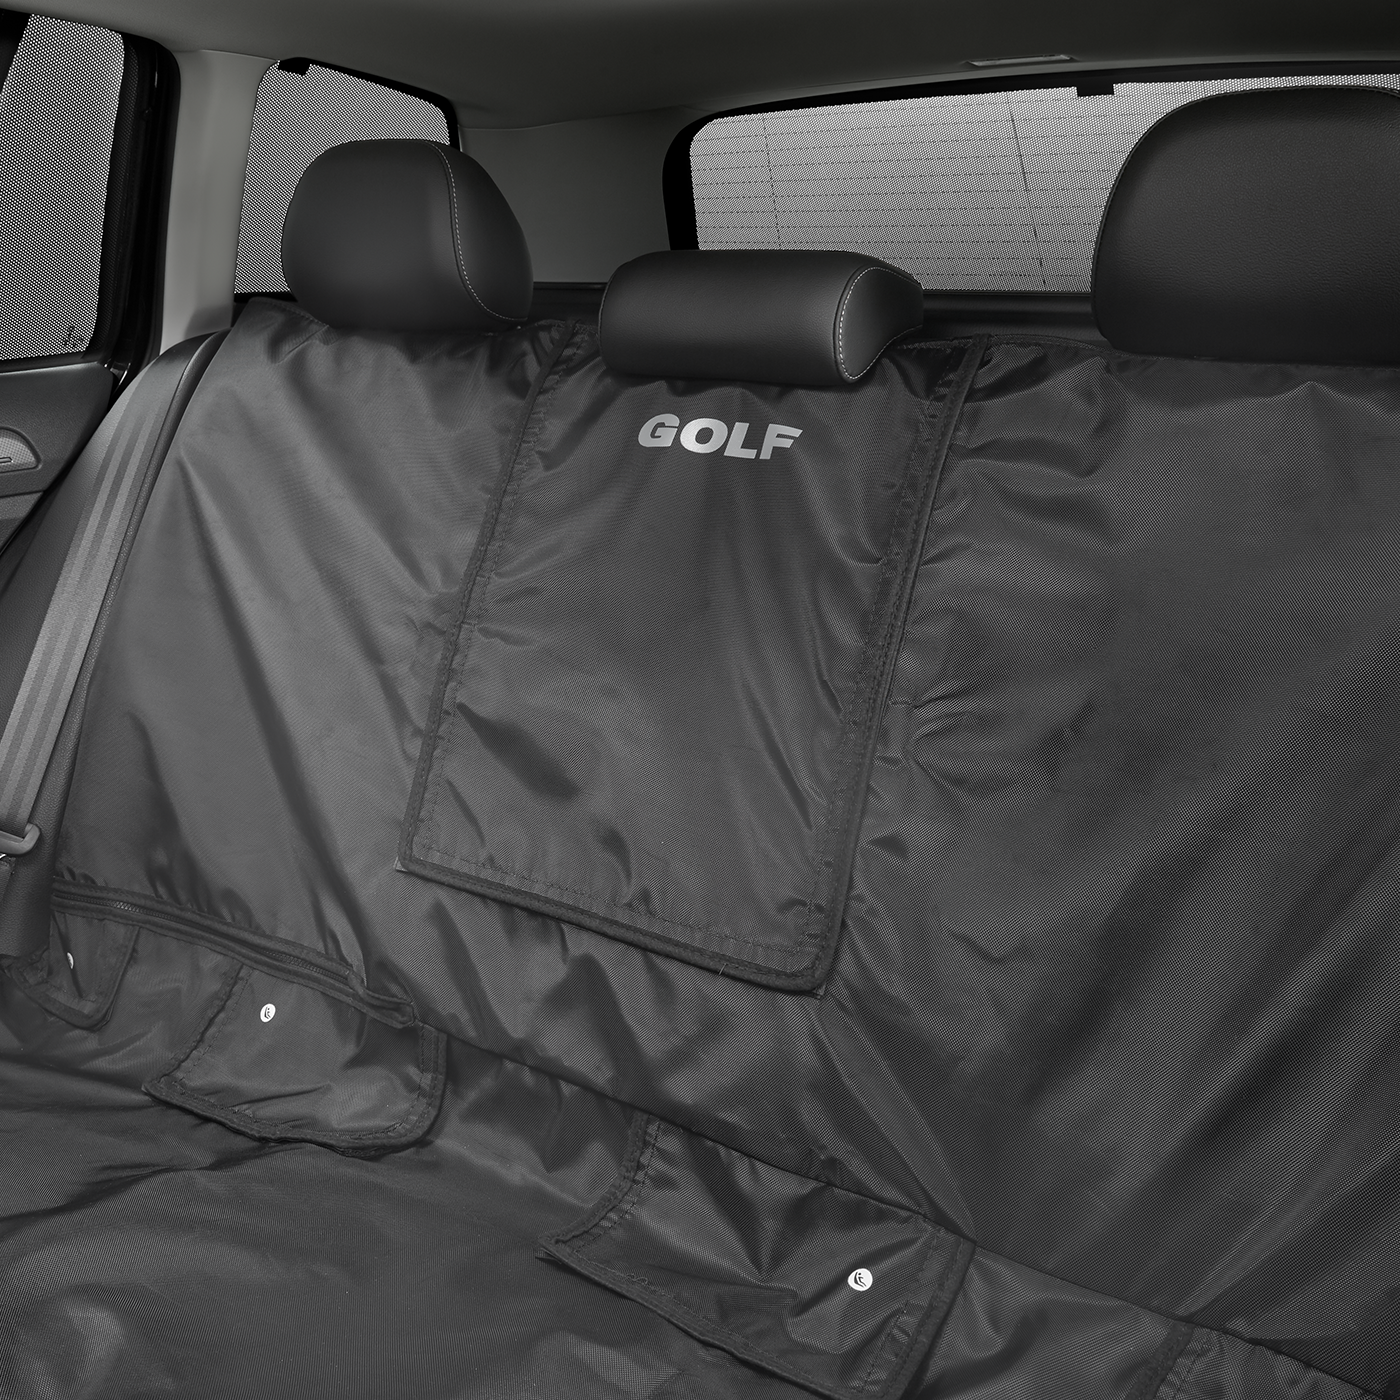 Volkswagen Rear Seat Cover With Golf Logo Vw Service And Parts - Genuine Vw Golf Mk7 Rear Seat Covers